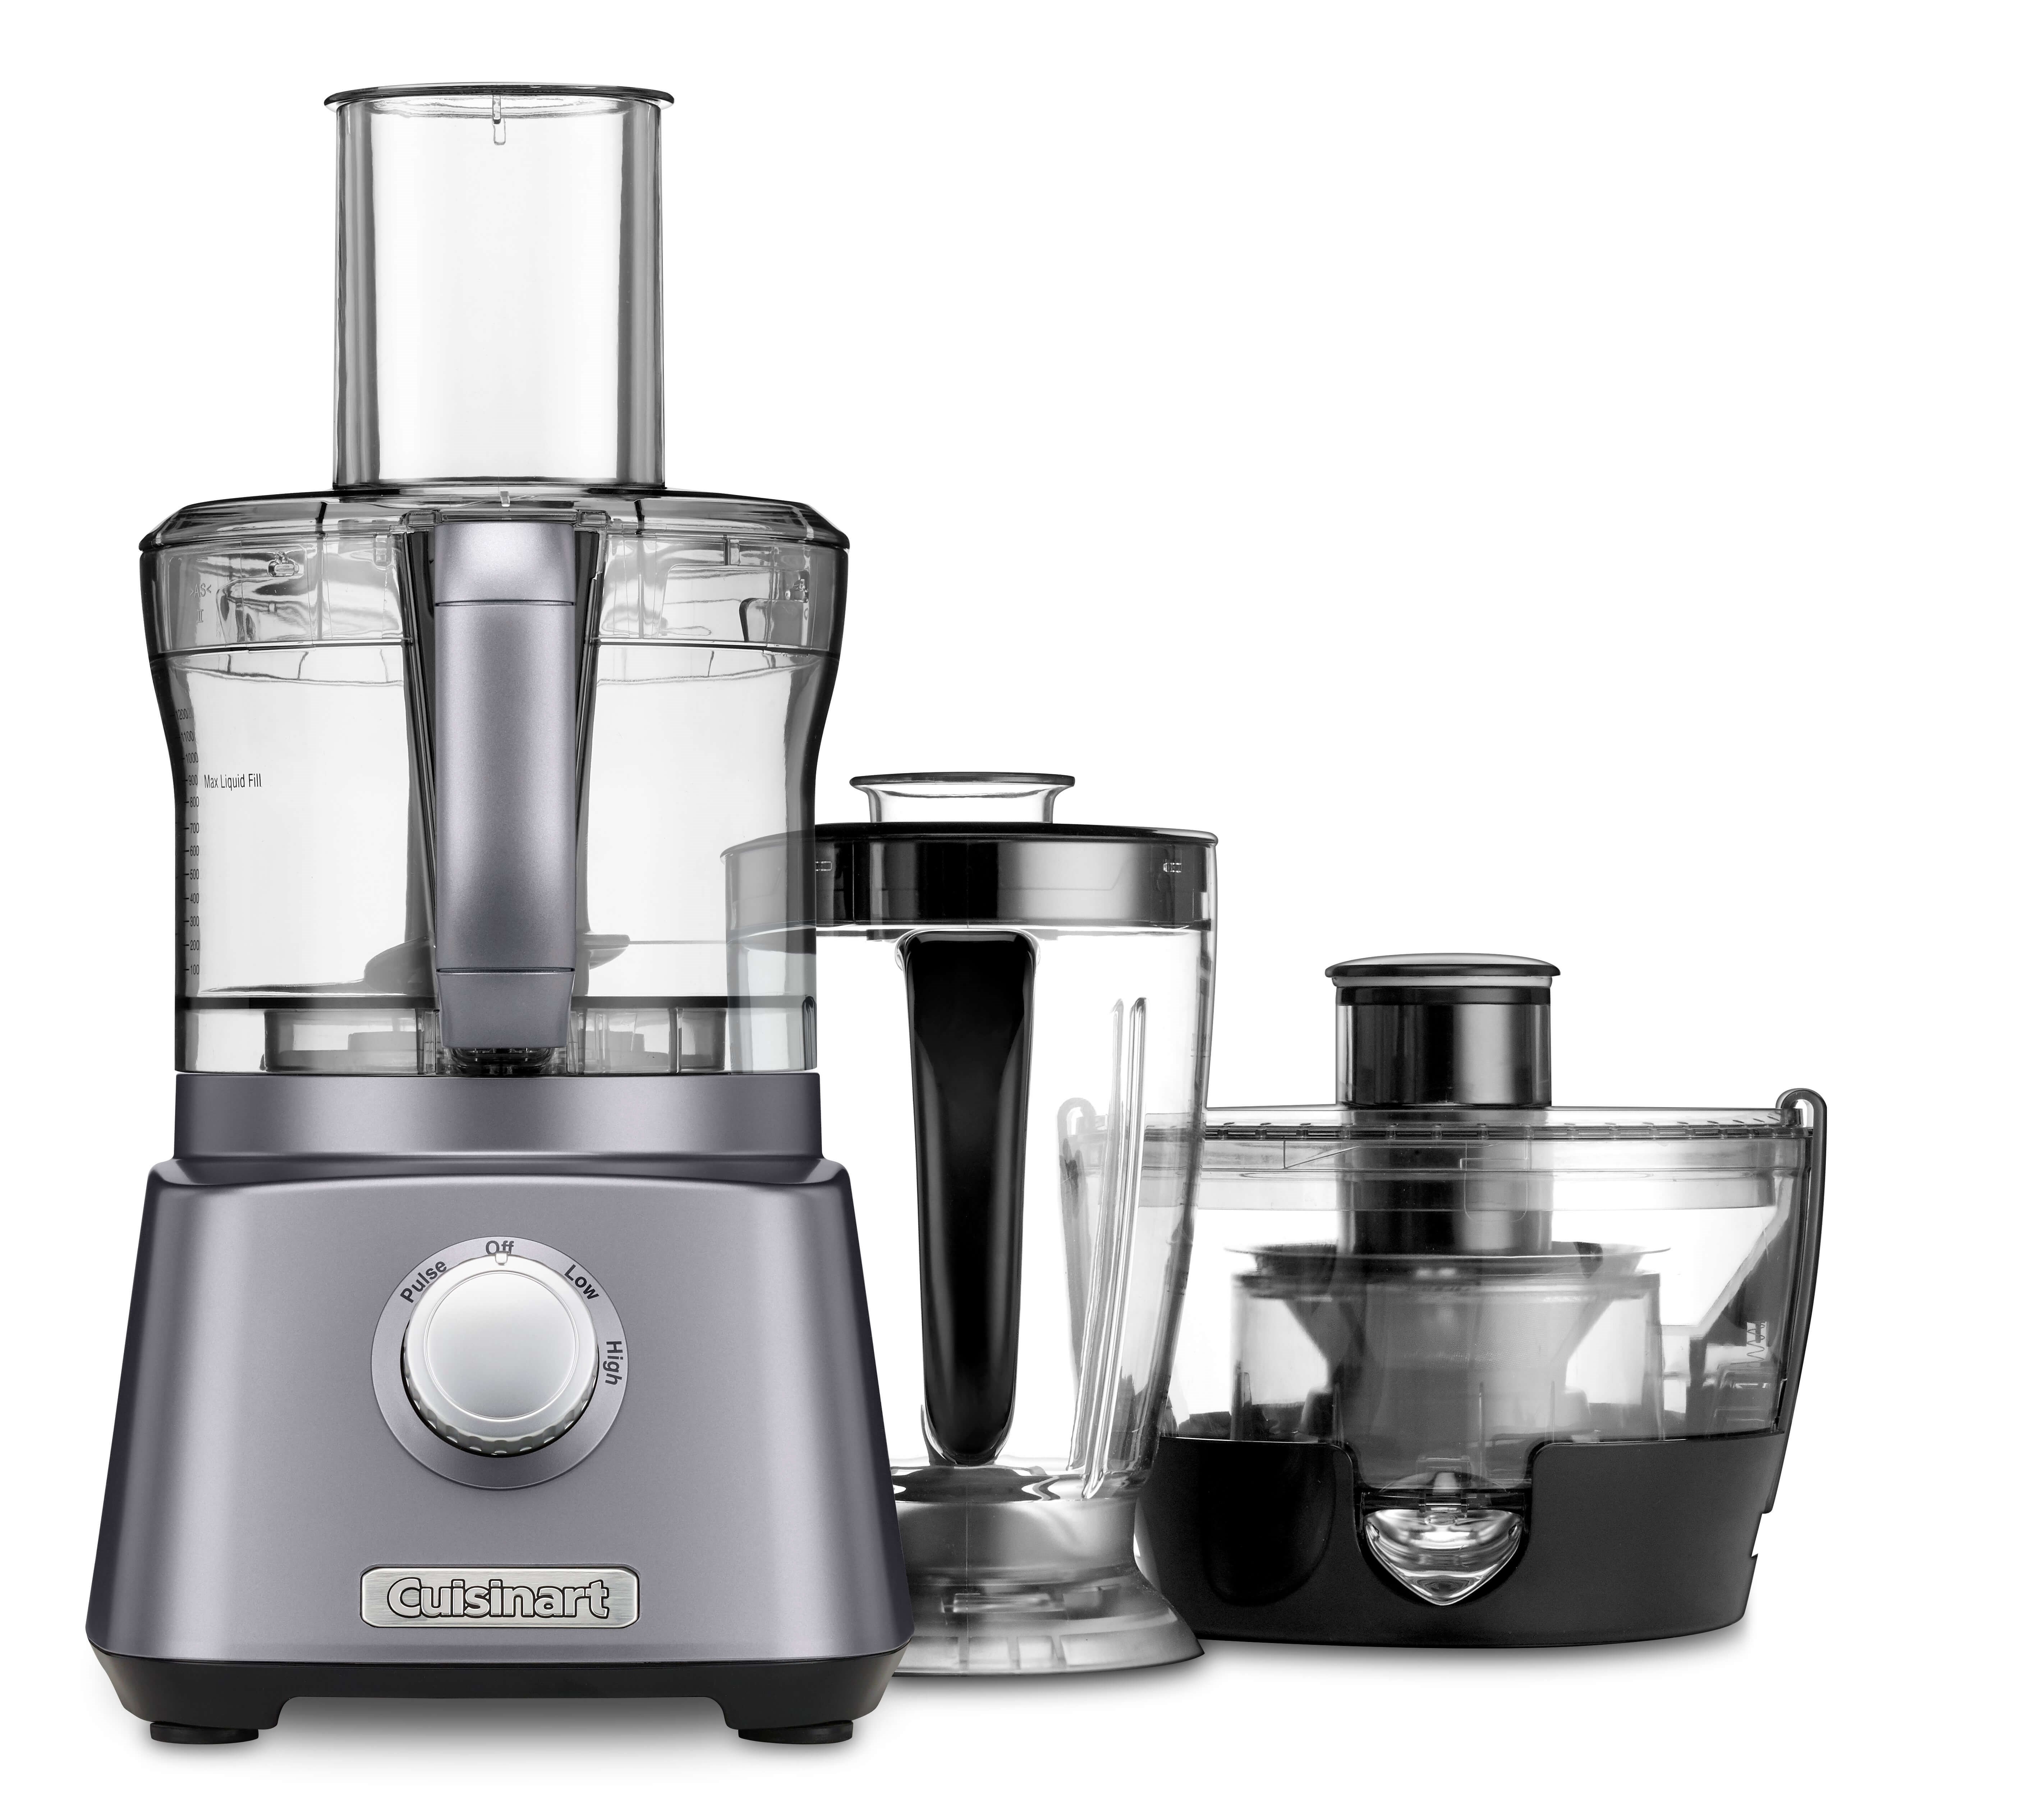 Discontinued Cuisinart Kitchen Central 3-in-1 Food Processor